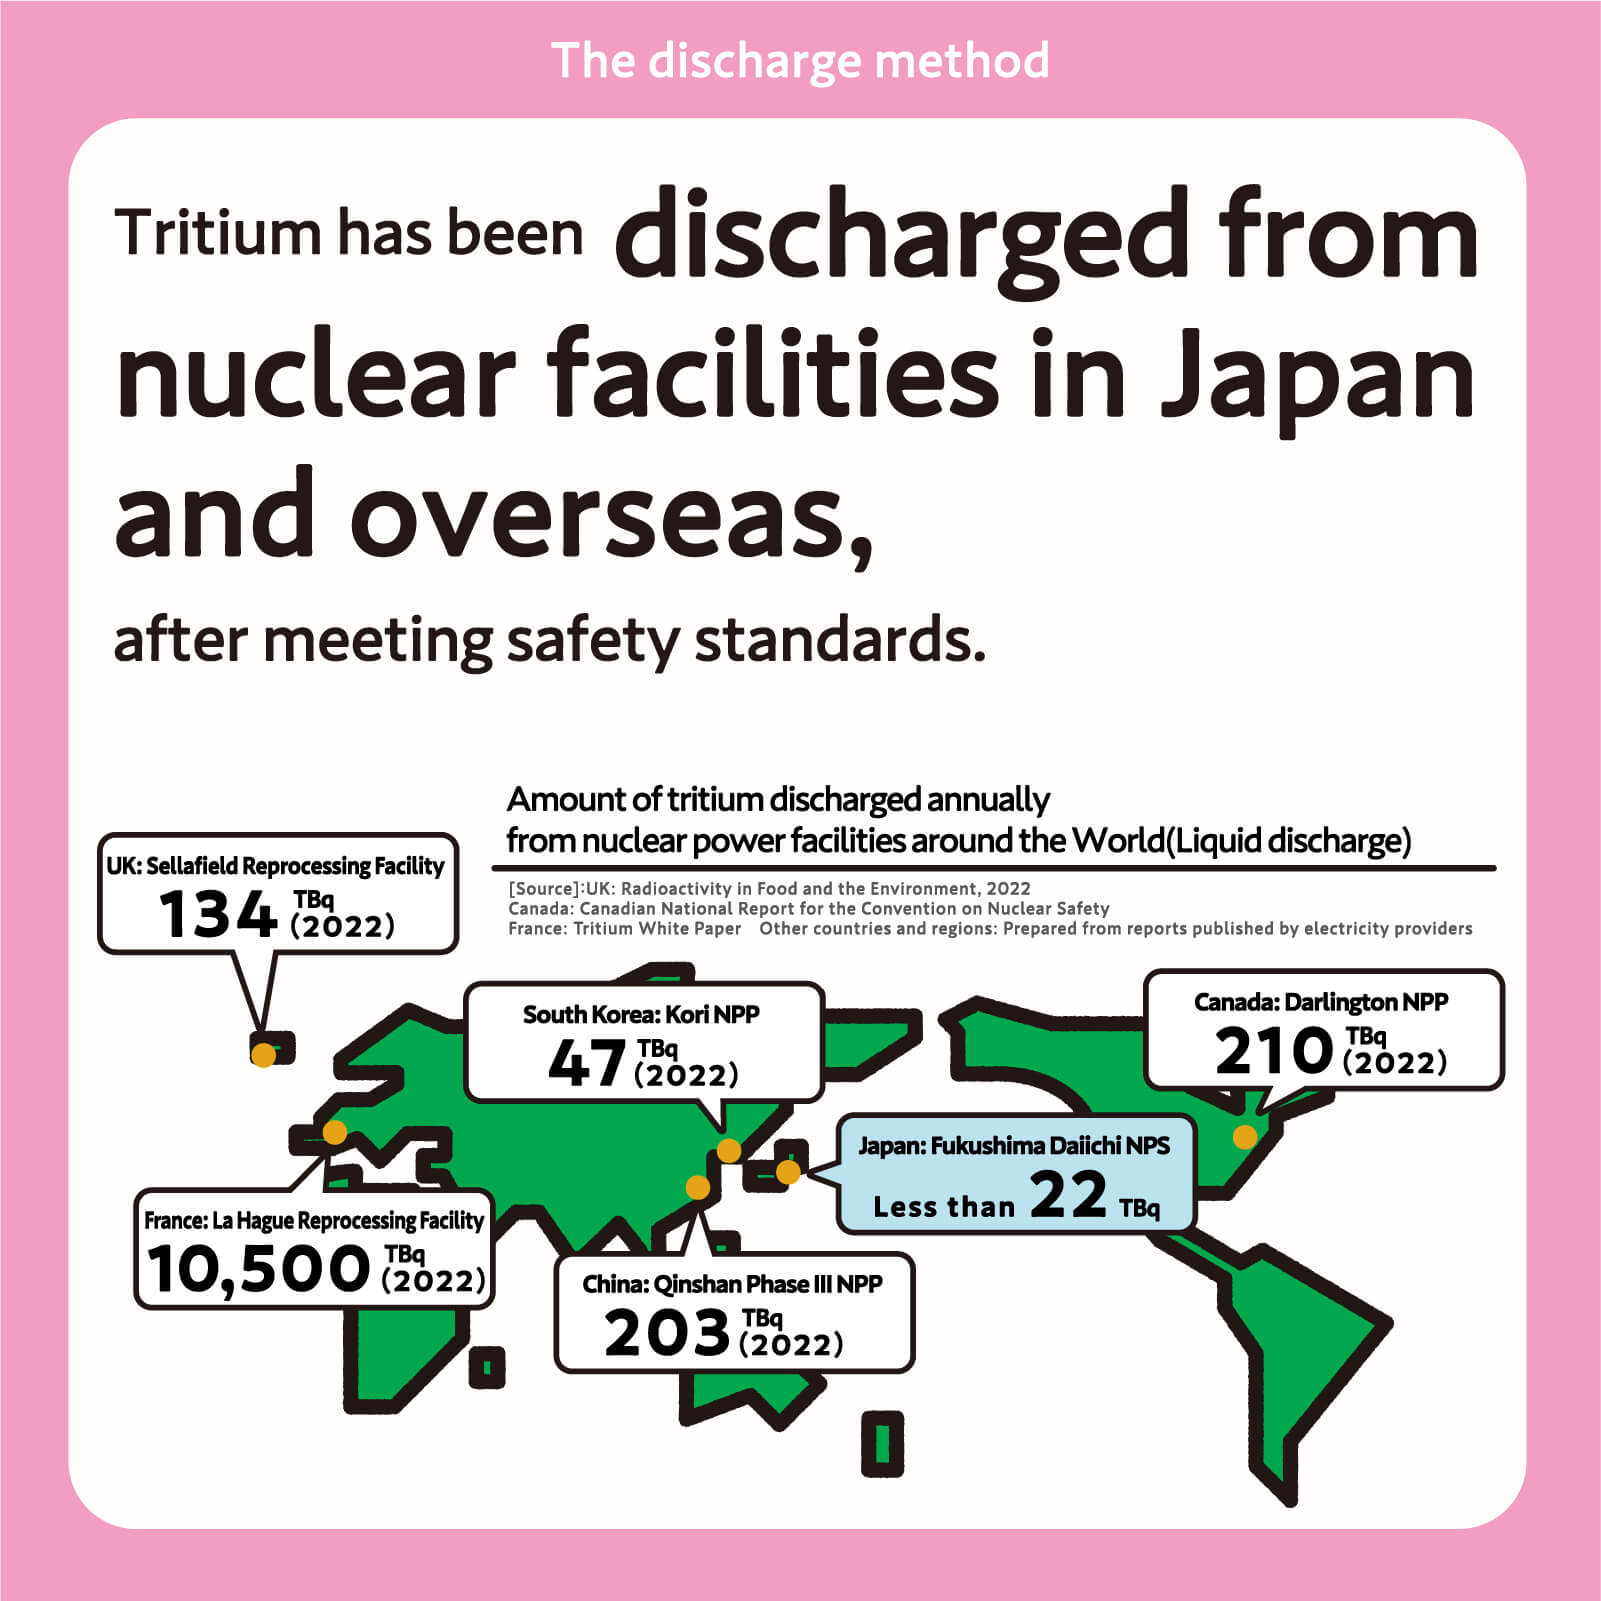 Tritium has been discharged from nuclear facilities in Japan and overseas, after meeting safety standards.